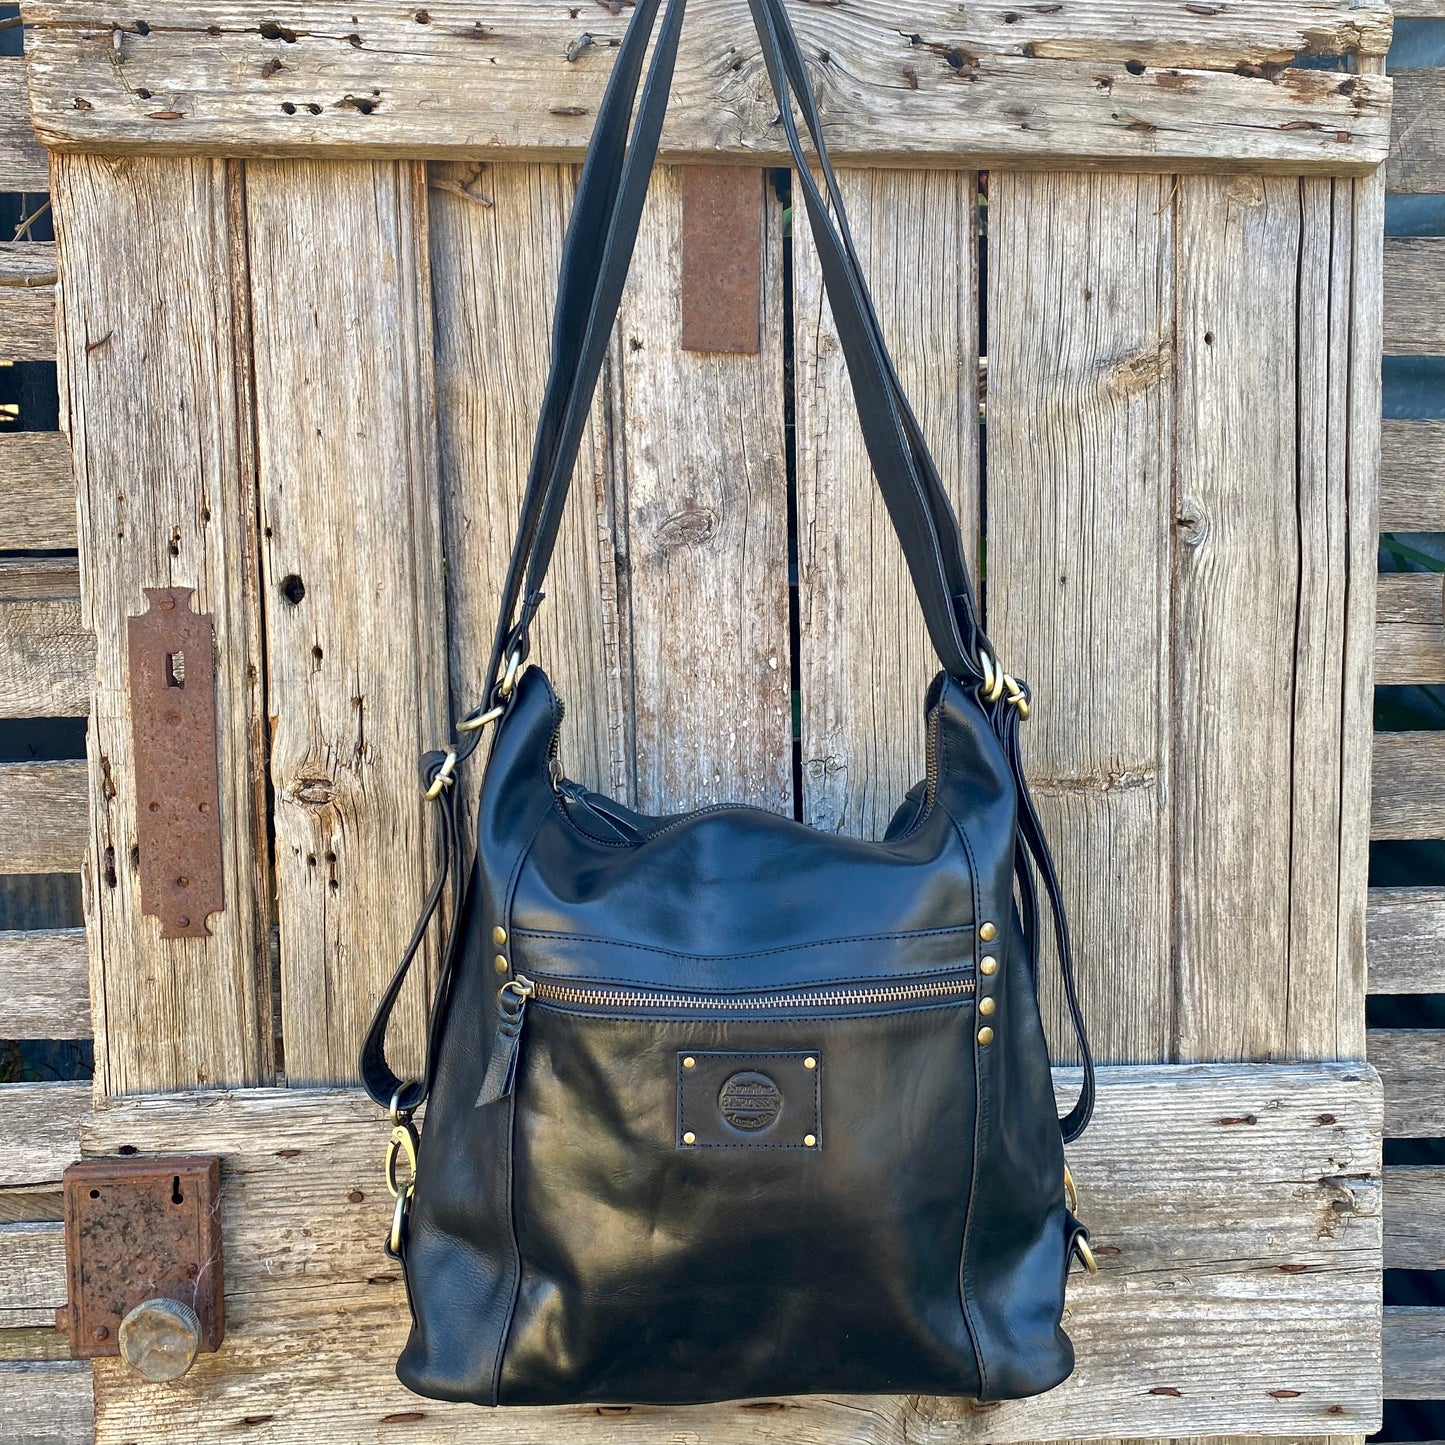 Convertible Leather Bag to Backpack